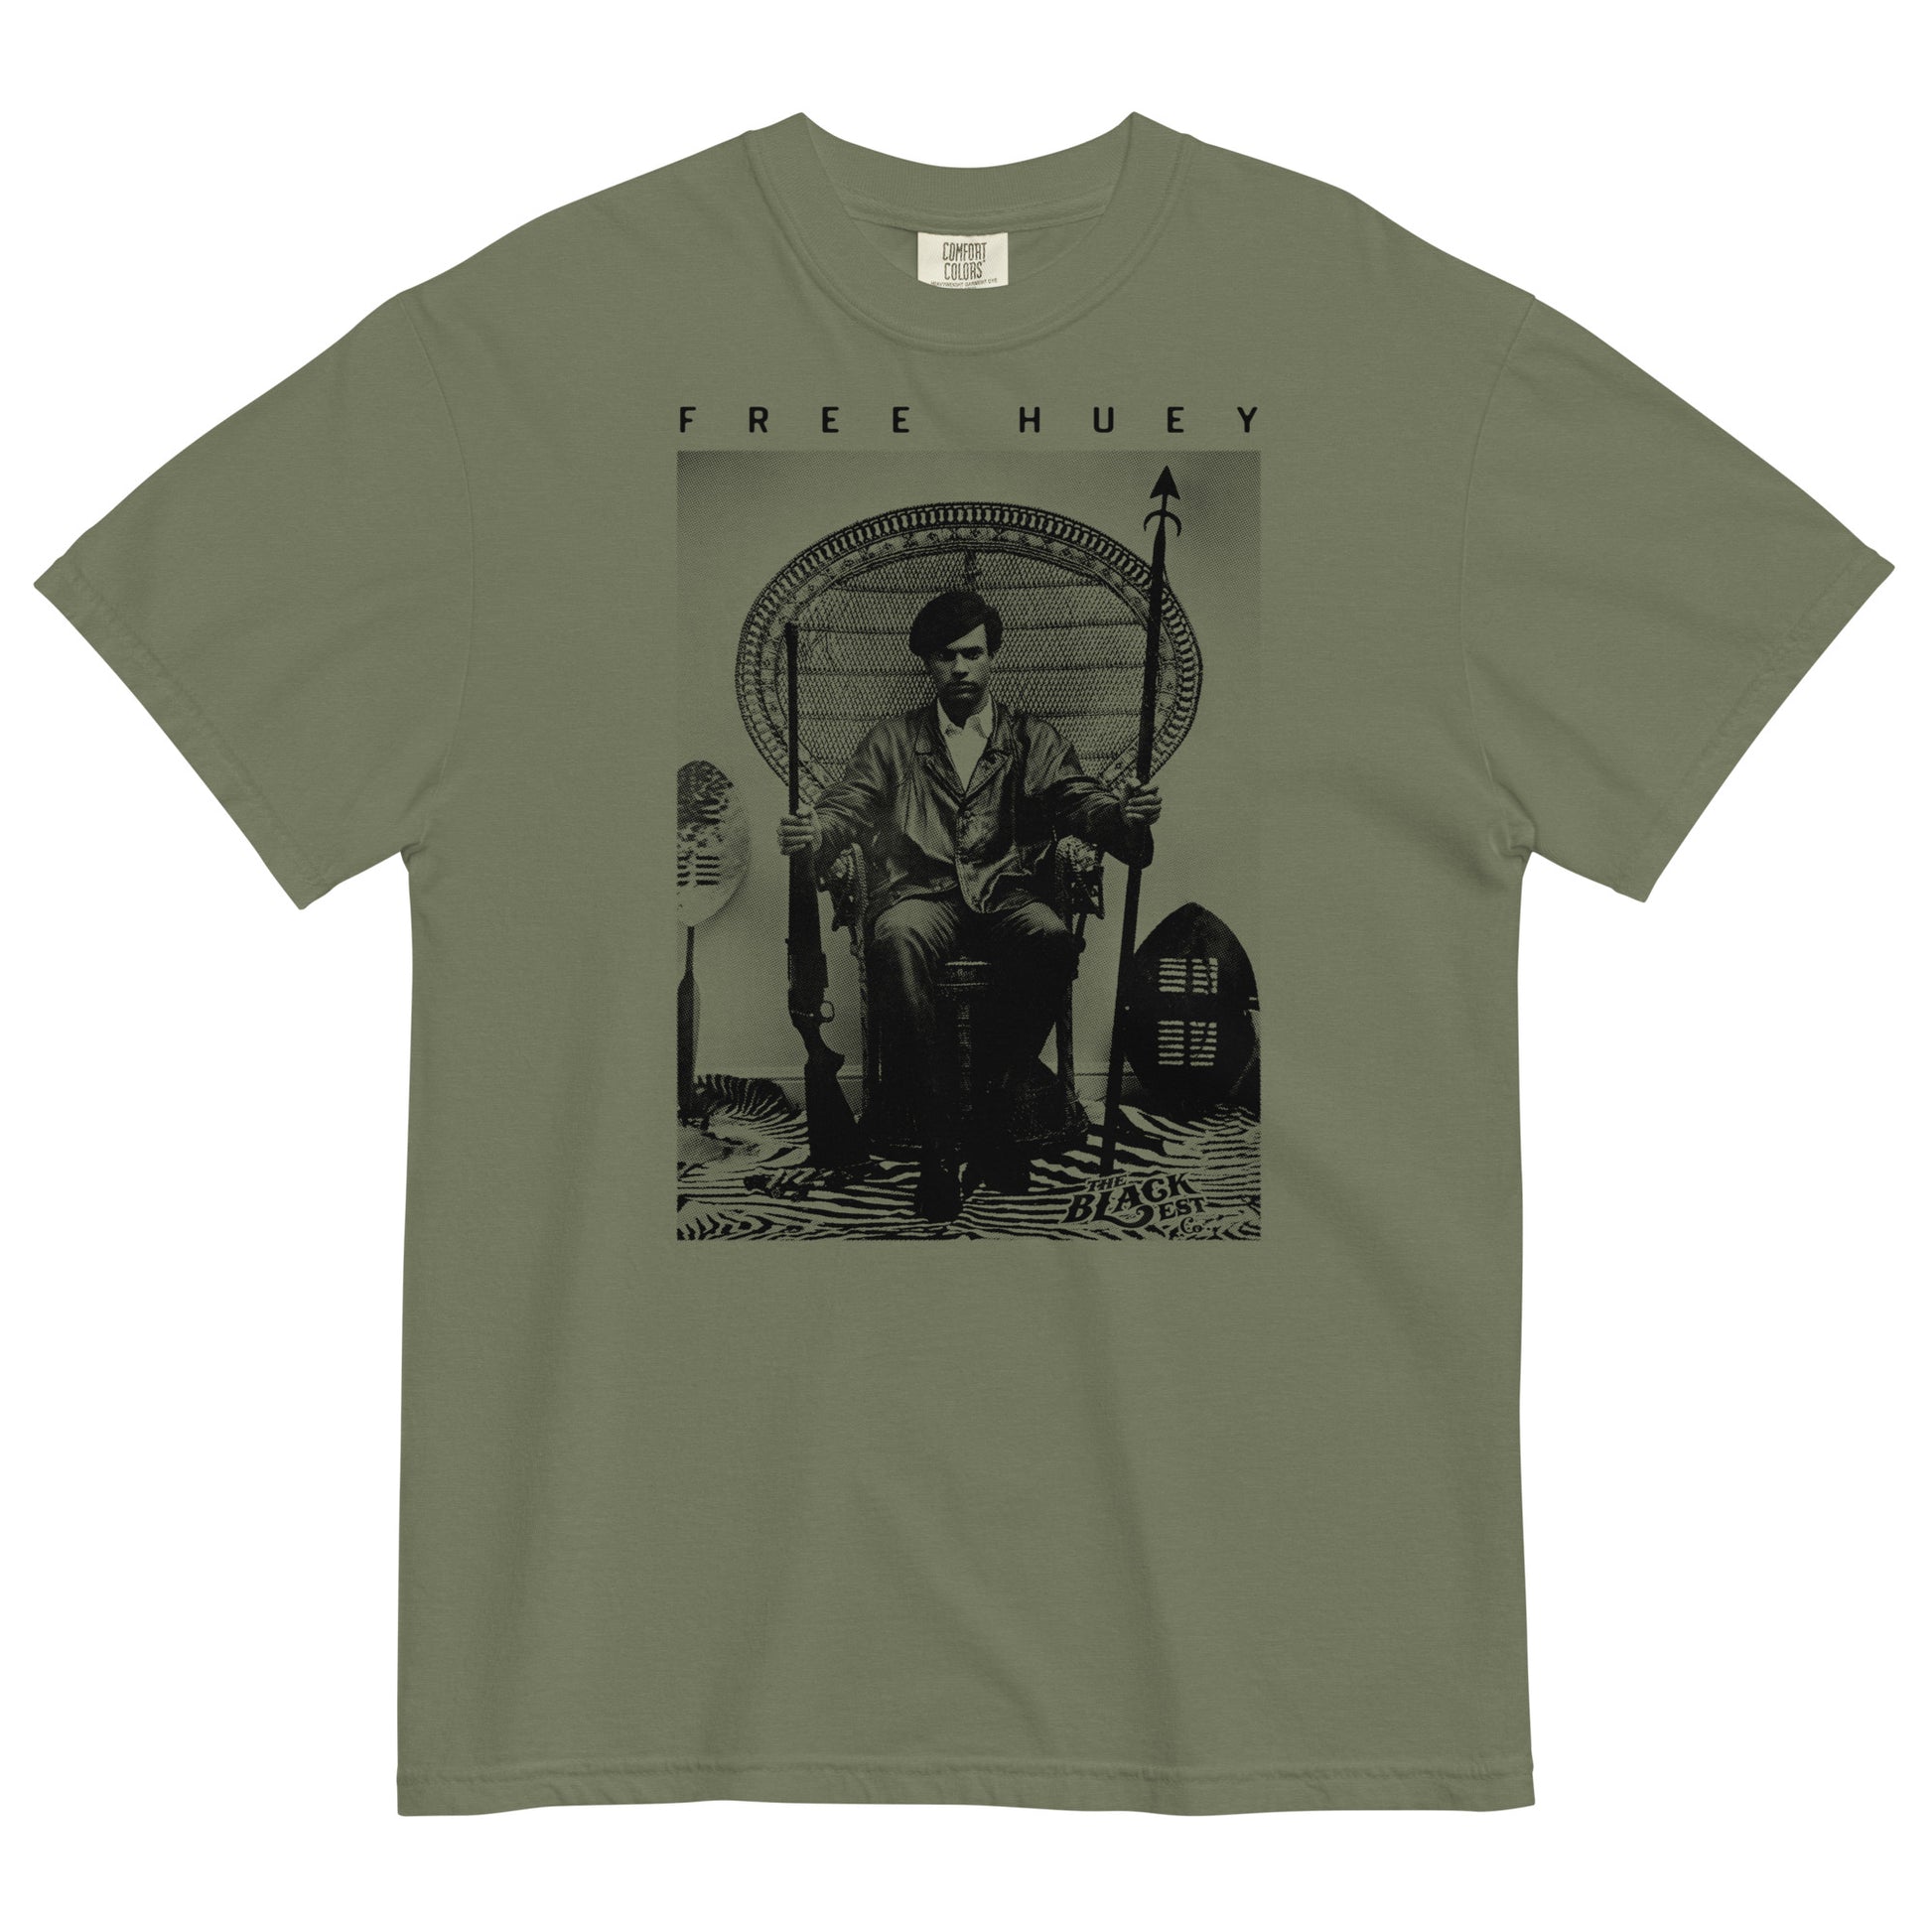 a olive green t shirt with a picture of huey p newton sitting on a wicker chair